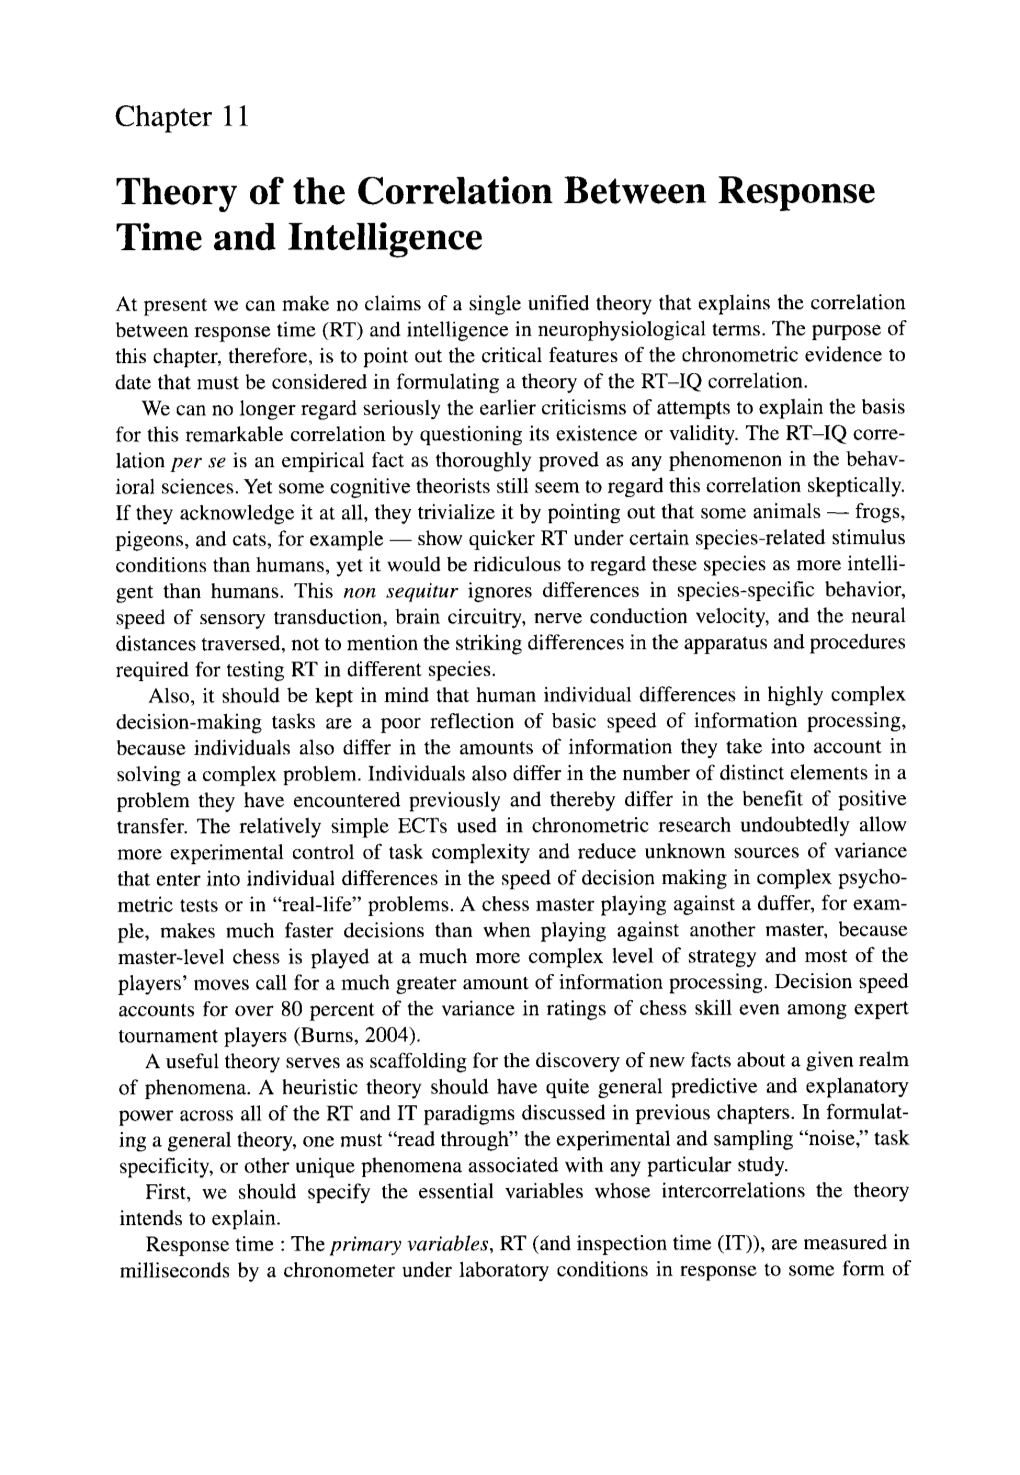 Theory of the Correlation Between Response Time and Intelligence